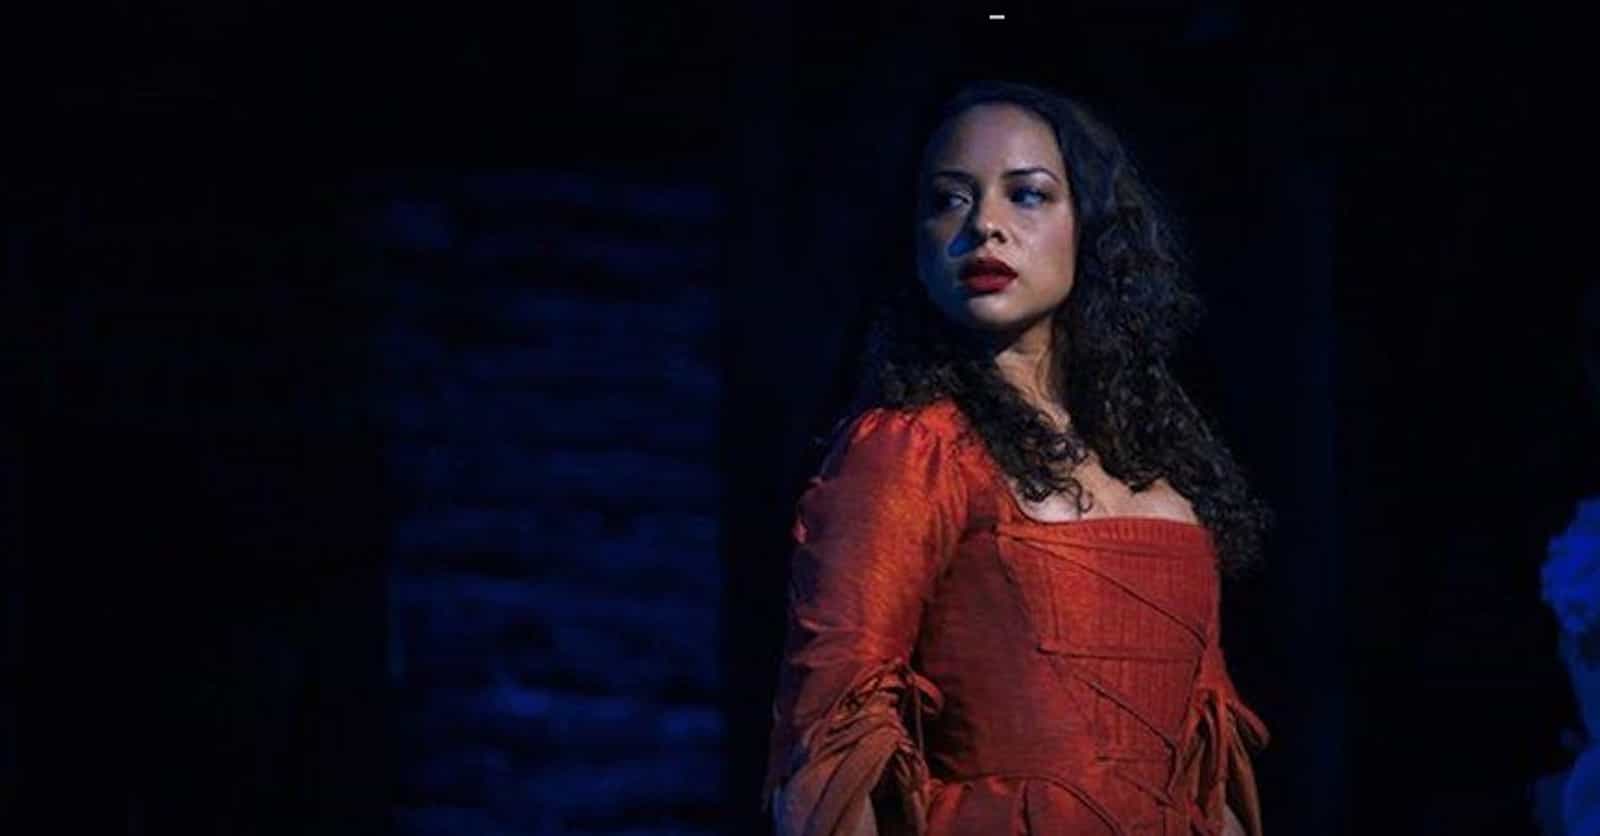 Details About Hamilton’s Affair With Maria Reynolds That ‘Hamilton’ Brought To Light